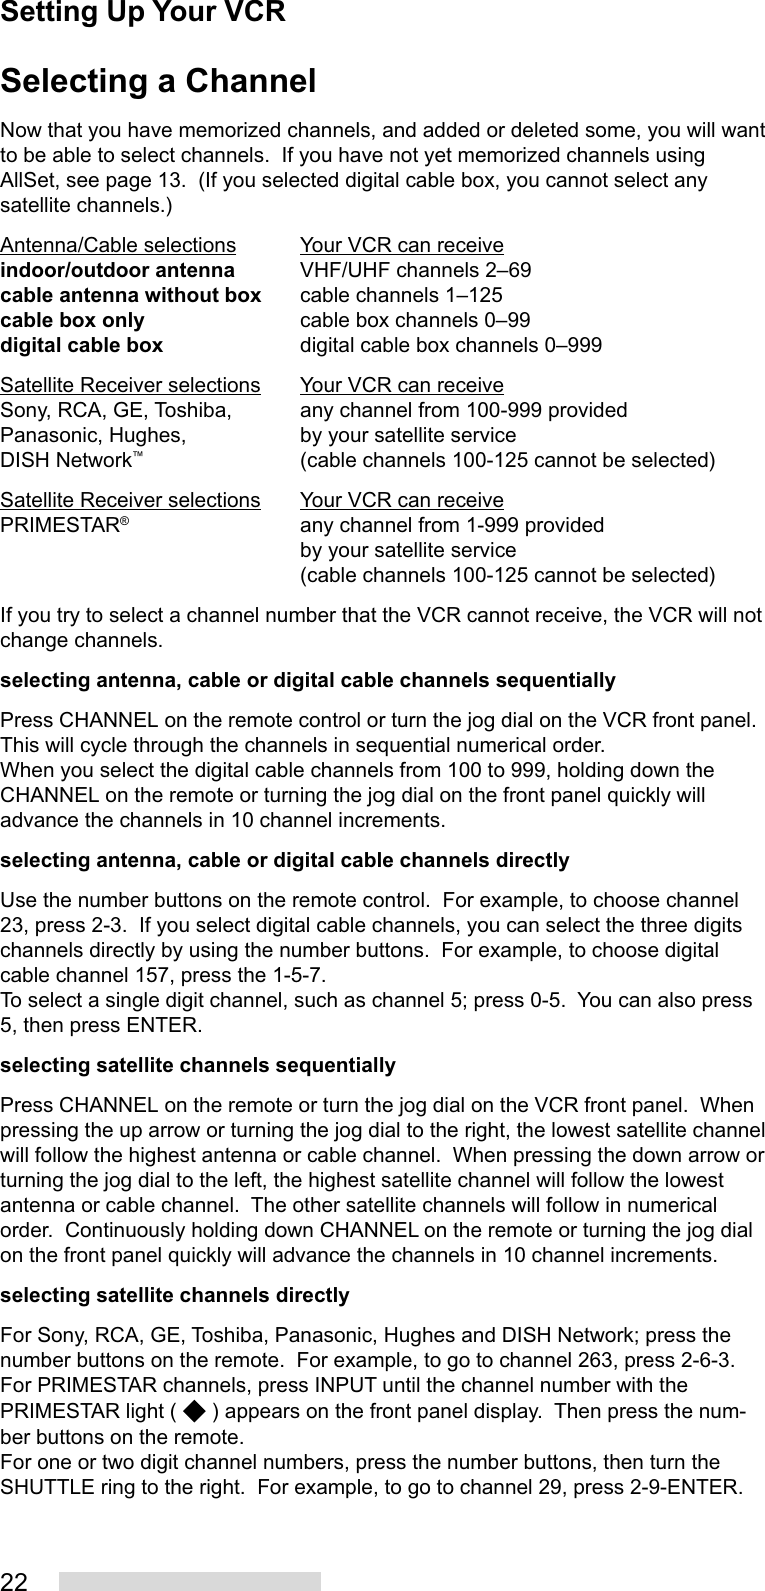 22Selecting a ChannelNow that you have memorized channels, and added or deleted some, you will wantto be able to select channels.  If you have not yet memorized channels usingAllSet, see page 13.  (If you selected digital cable box, you cannot select anysatellite channels.)Antenna/Cable selections Your VCR can receiveindoor/outdoor antenna VHF/UHF channels 2–69cable antenna without box cable channels 1–125cable box only cable box channels 0–99digital cable box digital cable box channels 0–999Satellite Receiver selections Your VCR can receiveSony, RCA, GE, Toshiba, any channel from 100-999 providedPanasonic, Hughes, by your satellite serviceDISH Network™(cable channels 100-125 cannot be selected)Satellite Receiver selections Your VCR can receivePRIMESTAR®any channel from 1-999 providedby your satellite service(cable channels 100-125 cannot be selected)If you try to select a channel number that the VCR cannot receive, the VCR will notchange channels.selecting antenna, cable or digital cable channels sequentiallyPress CHANNEL on the remote control or turn the jog dial on the VCR front panel.This will cycle through the channels in sequential numerical order.When you select the digital cable channels from 100 to 999, holding down theCHANNEL on the remote or turning the jog dial on the front panel quickly willadvance the channels in 10 channel increments.selecting antenna, cable or digital cable channels directlyUse the number buttons on the remote control.  For example, to choose channel23, press 2-3.  If you select digital cable channels, you can select the three digitschannels directly by using the number buttons.  For example, to choose digitalcable channel 157, press the 1-5-7.To select a single digit channel, such as channel 5; press 0-5.  You can also press5, then press ENTER.selecting satellite channels sequentiallyPress CHANNEL on the remote or turn the jog dial on the VCR front panel.  Whenpressing the up arrow or turning the jog dial to the right, the lowest satellite channelwill follow the highest antenna or cable channel.  When pressing the down arrow orturning the jog dial to the left, the highest satellite channel will follow the lowestantenna or cable channel.  The other satellite channels will follow in numericalorder.  Continuously holding down CHANNEL on the remote or turning the jog dialon the front panel quickly will advance the channels in 10 channel increments.selecting satellite channels directlyFor Sony, RCA, GE, Toshiba, Panasonic, Hughes and DISH Network; press thenumber buttons on the remote.  For example, to go to channel 263, press 2-6-3.For PRIMESTAR channels, press INPUT until the channel number with thePRIMESTAR light (   ) appears on the front panel display.  Then press the num-ber buttons on the remote.For one or two digit channel numbers, press the number buttons, then turn theSHUTTLE ring to the right.  For example, to go to channel 29, press 2-9-ENTER.Setting Up Your VCR